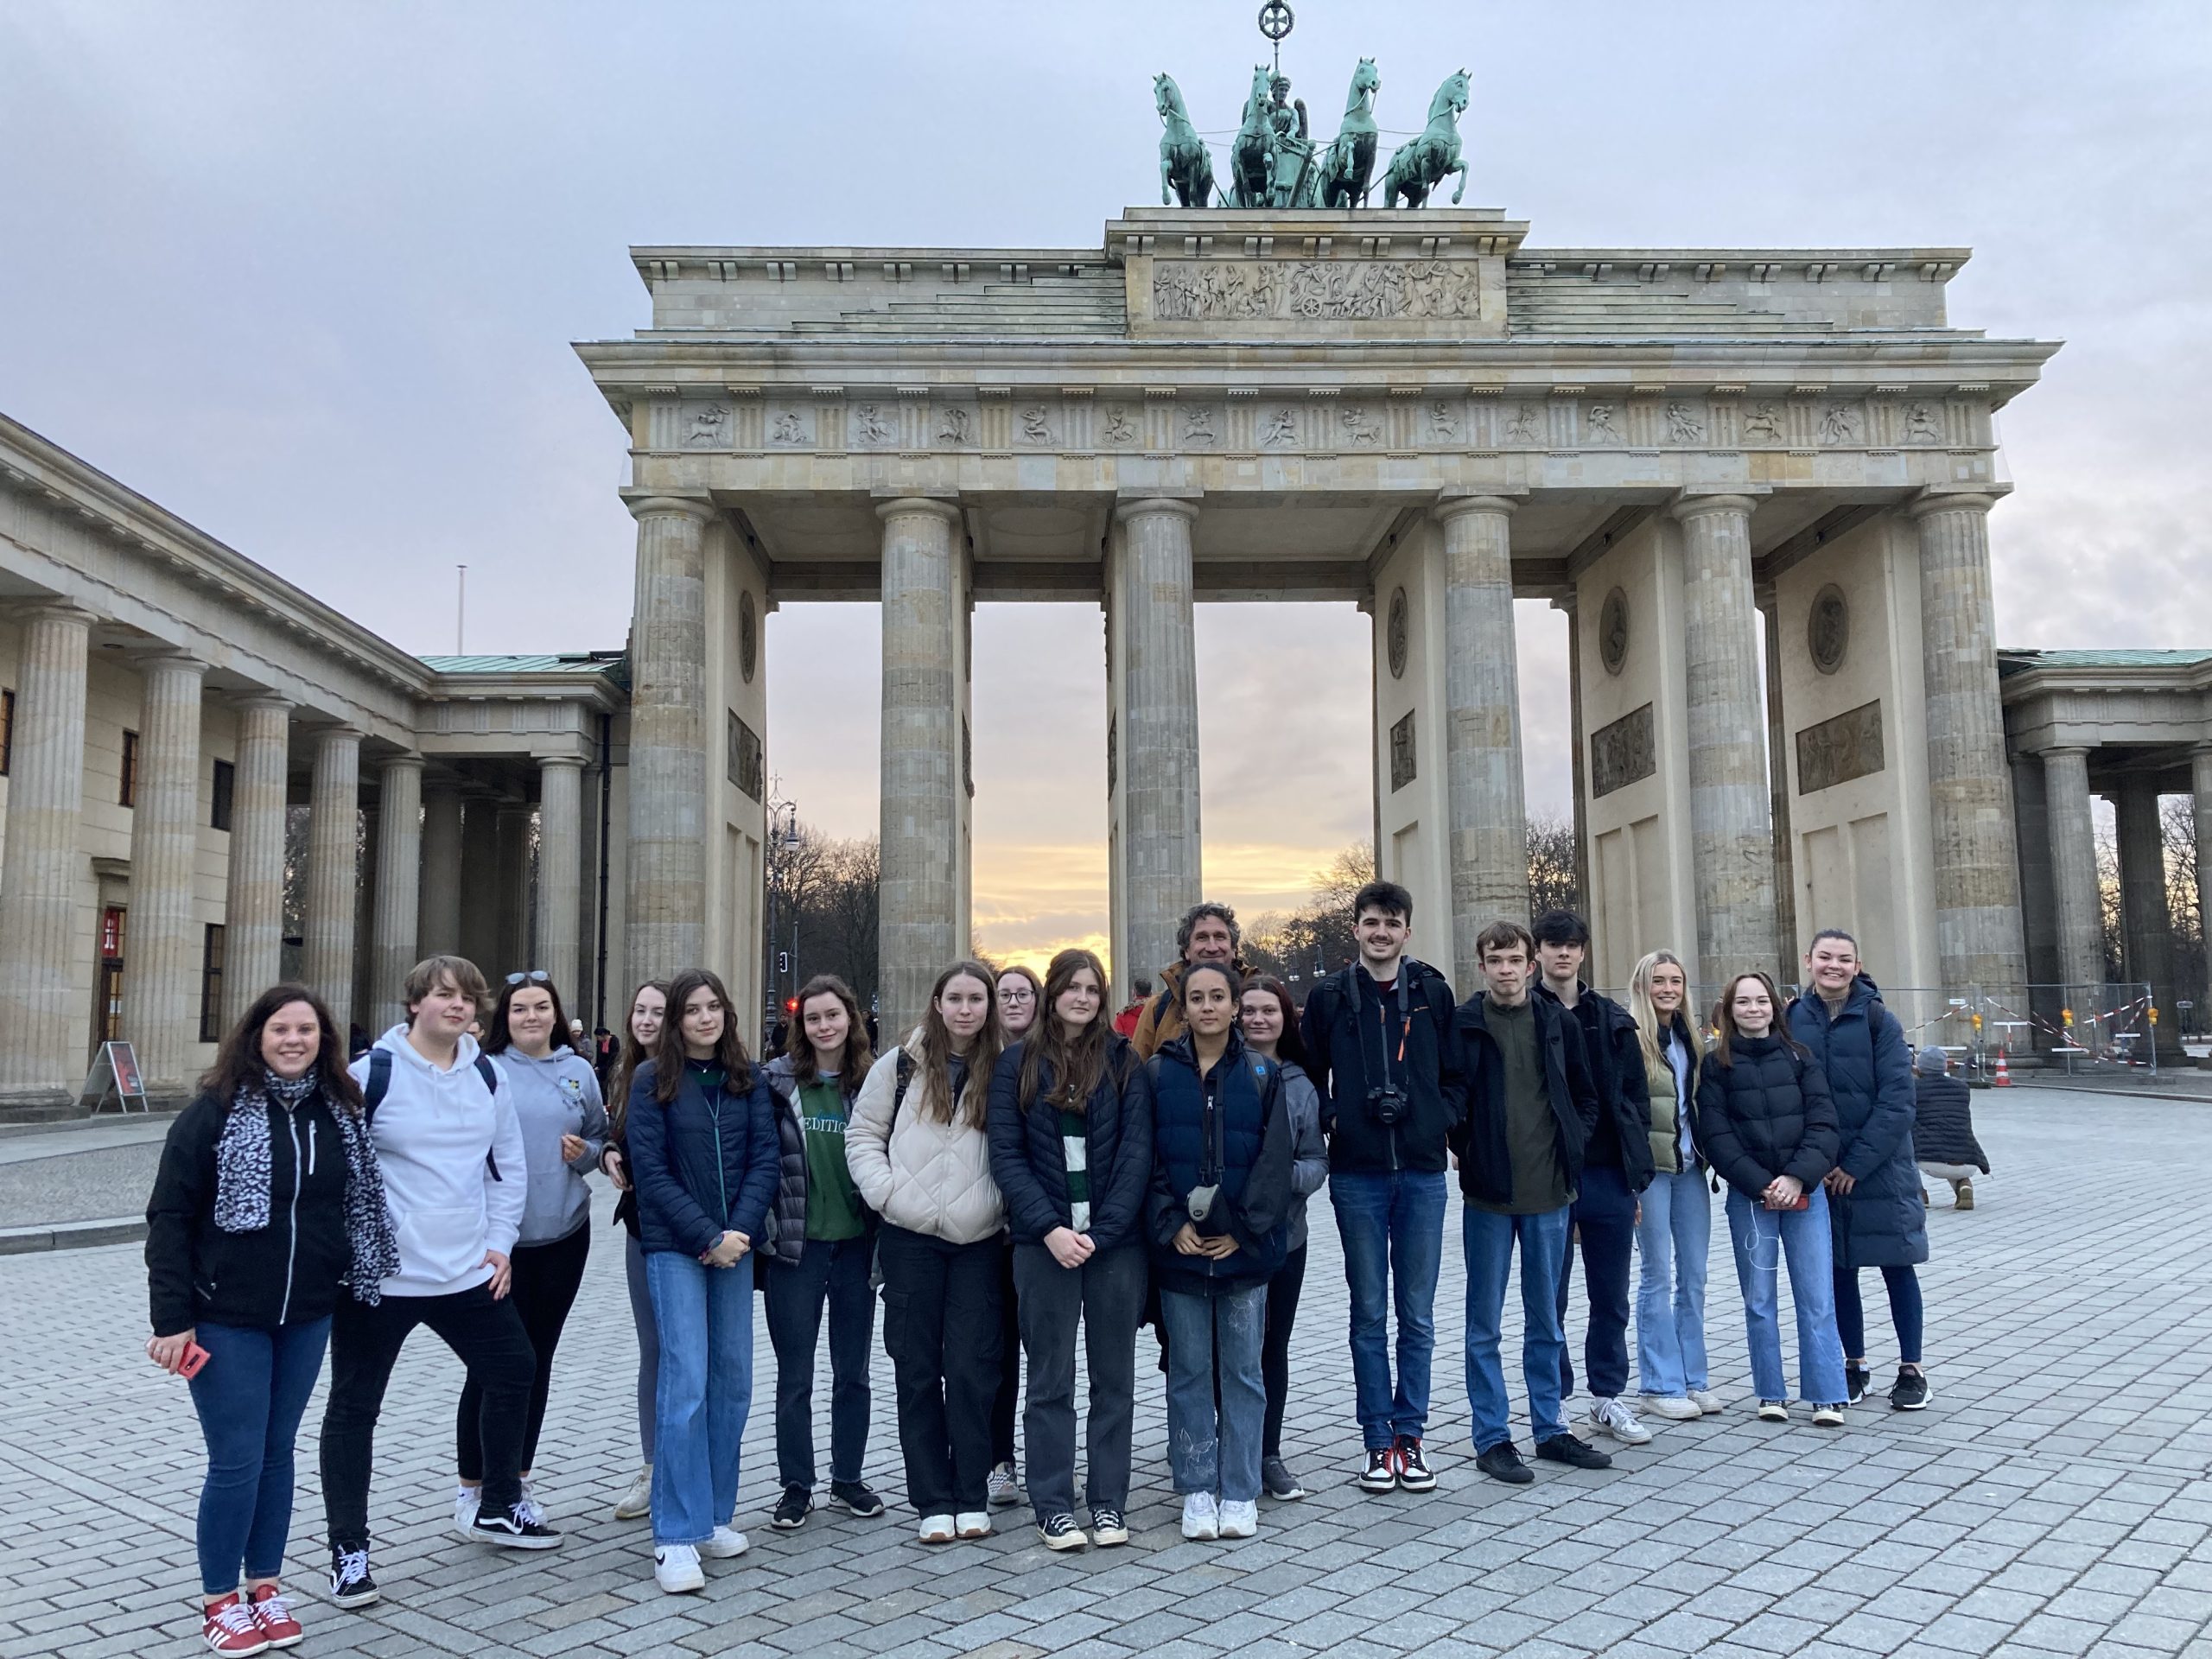 Students standing in front of The Brandenburg Gate, Berlin.